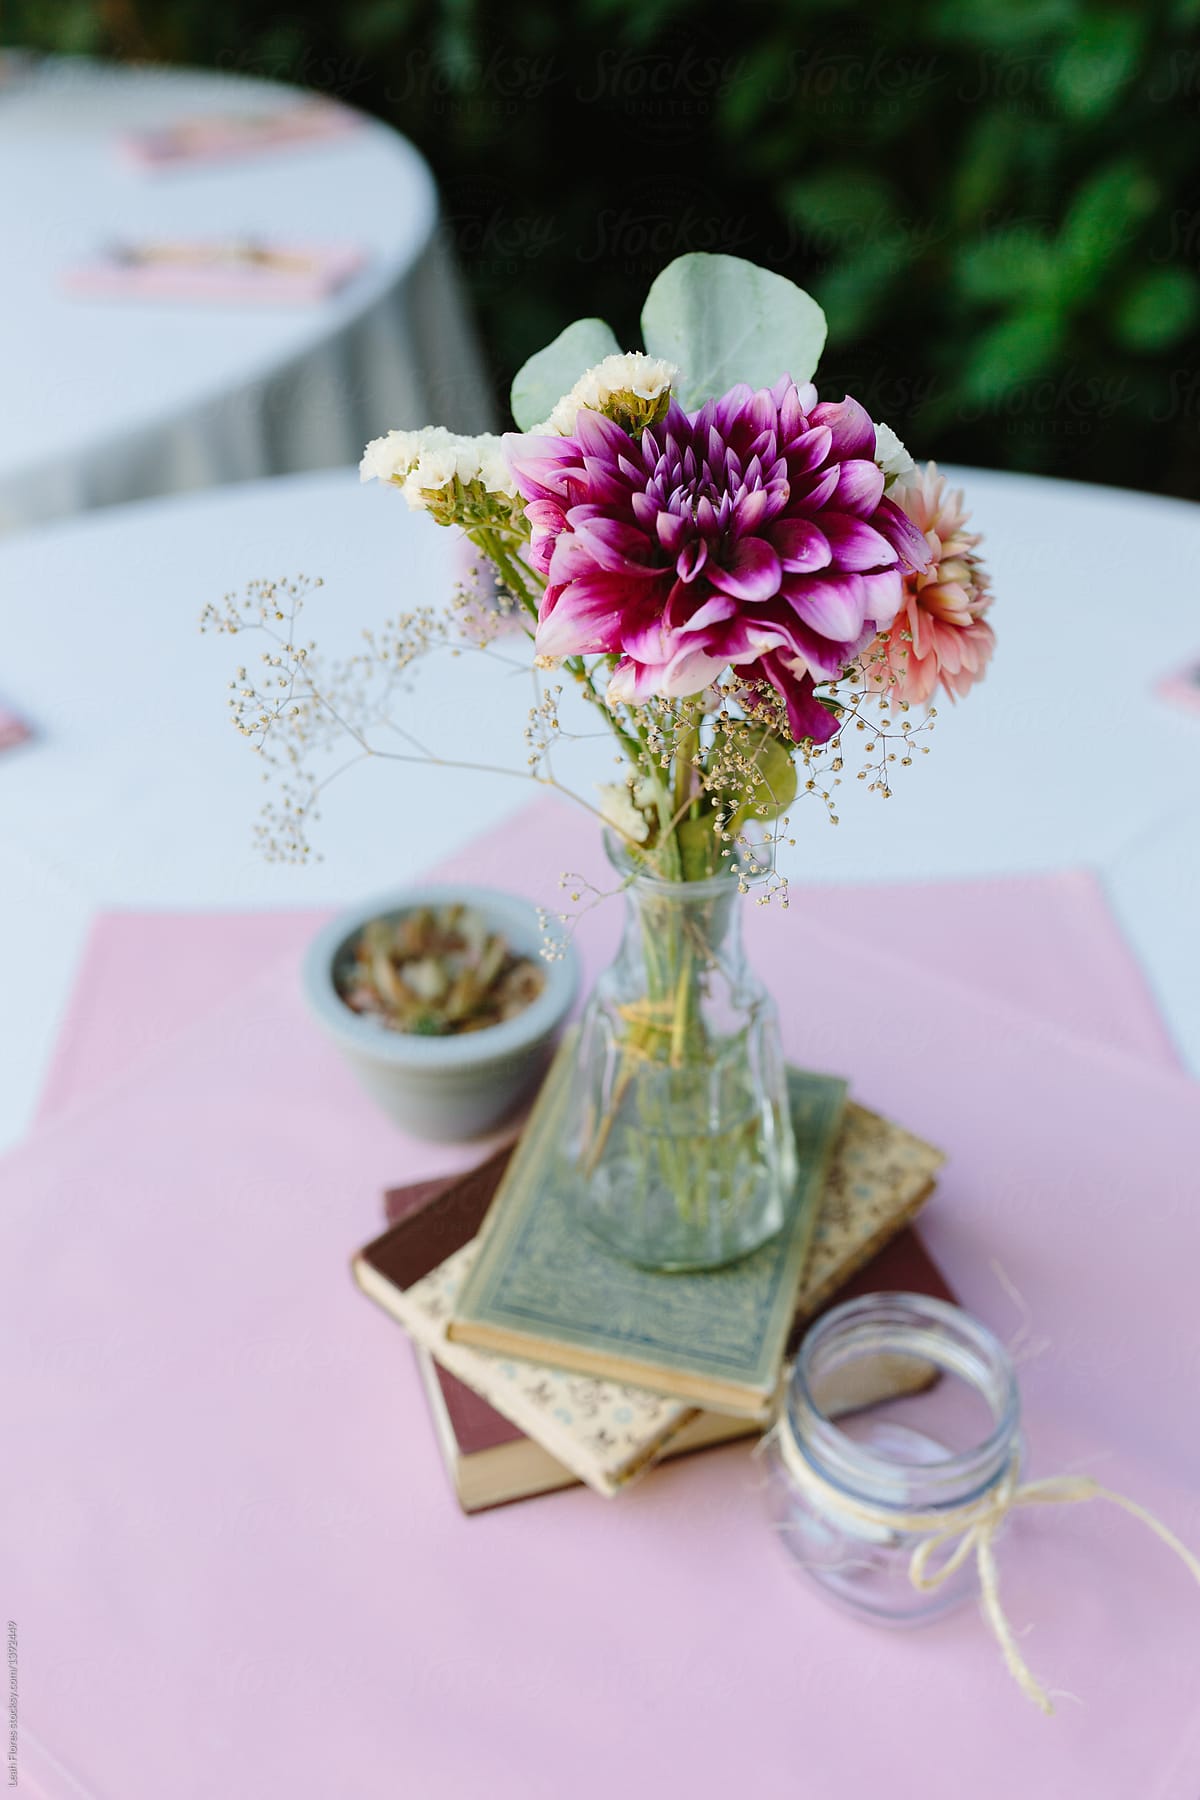 Cute Arrangement of Decorations on an Outdoor Wedding Dining Table